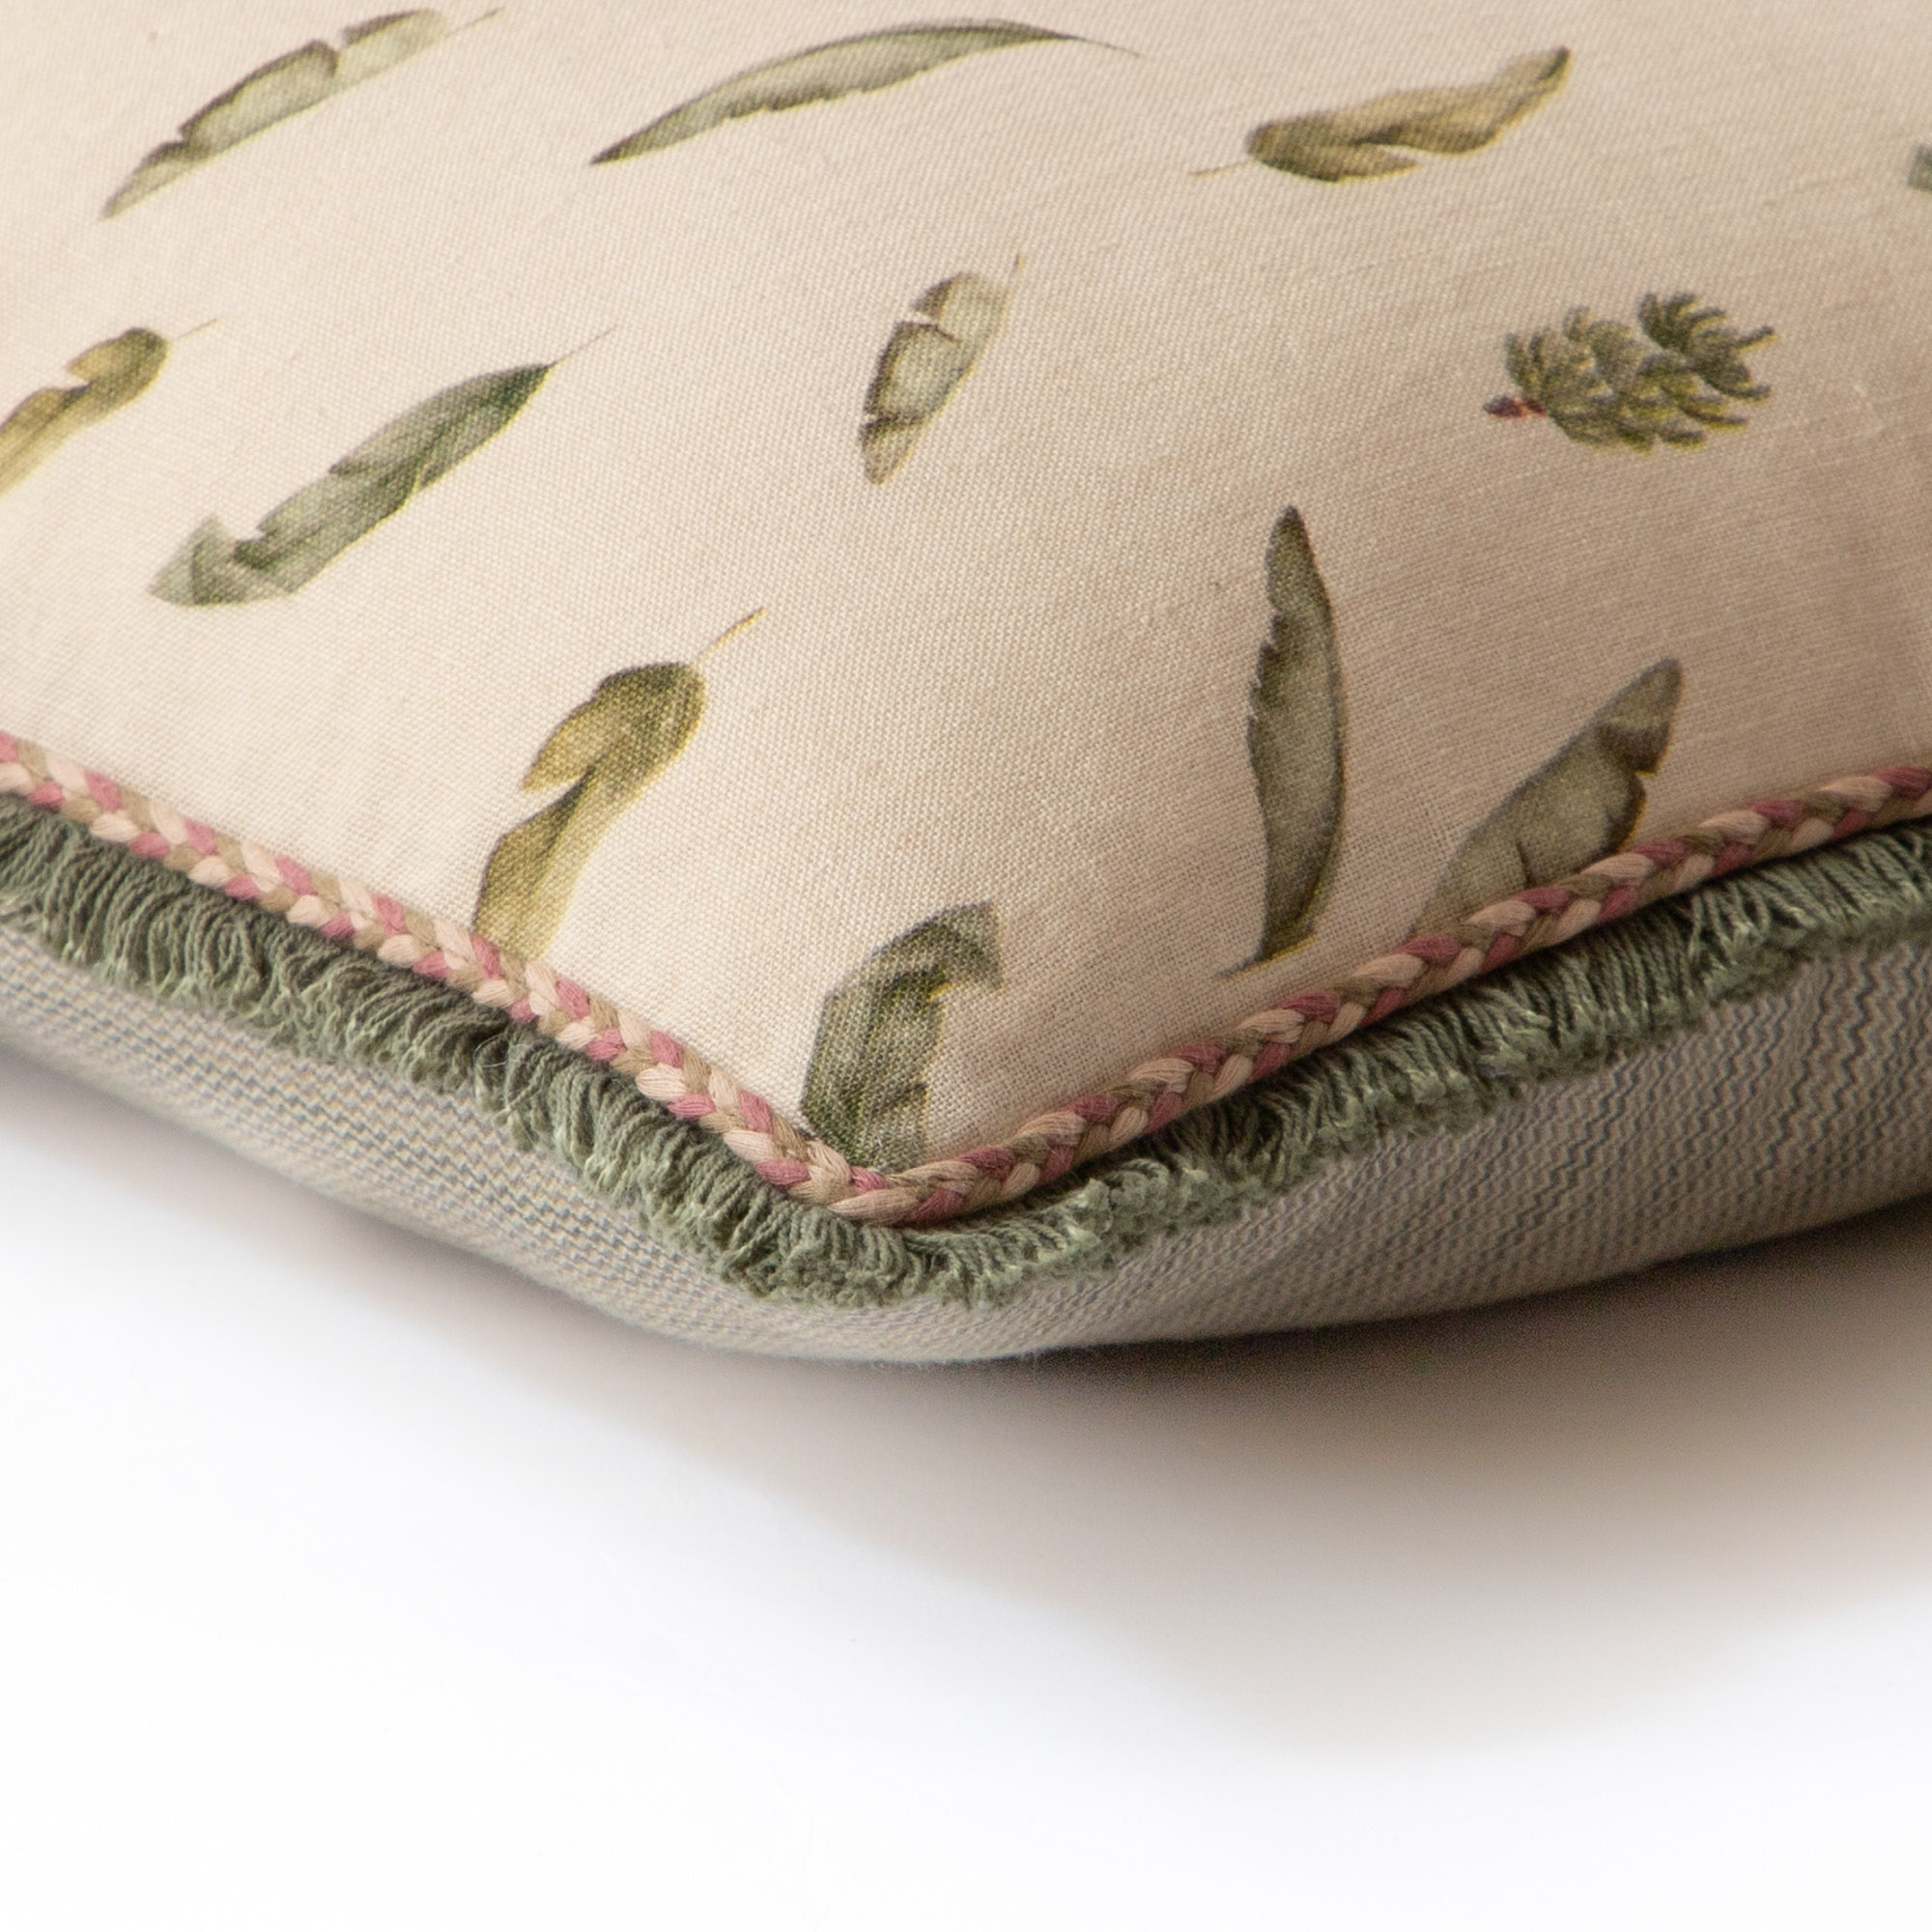 Banana Fruit and Leaves Cushion Cover